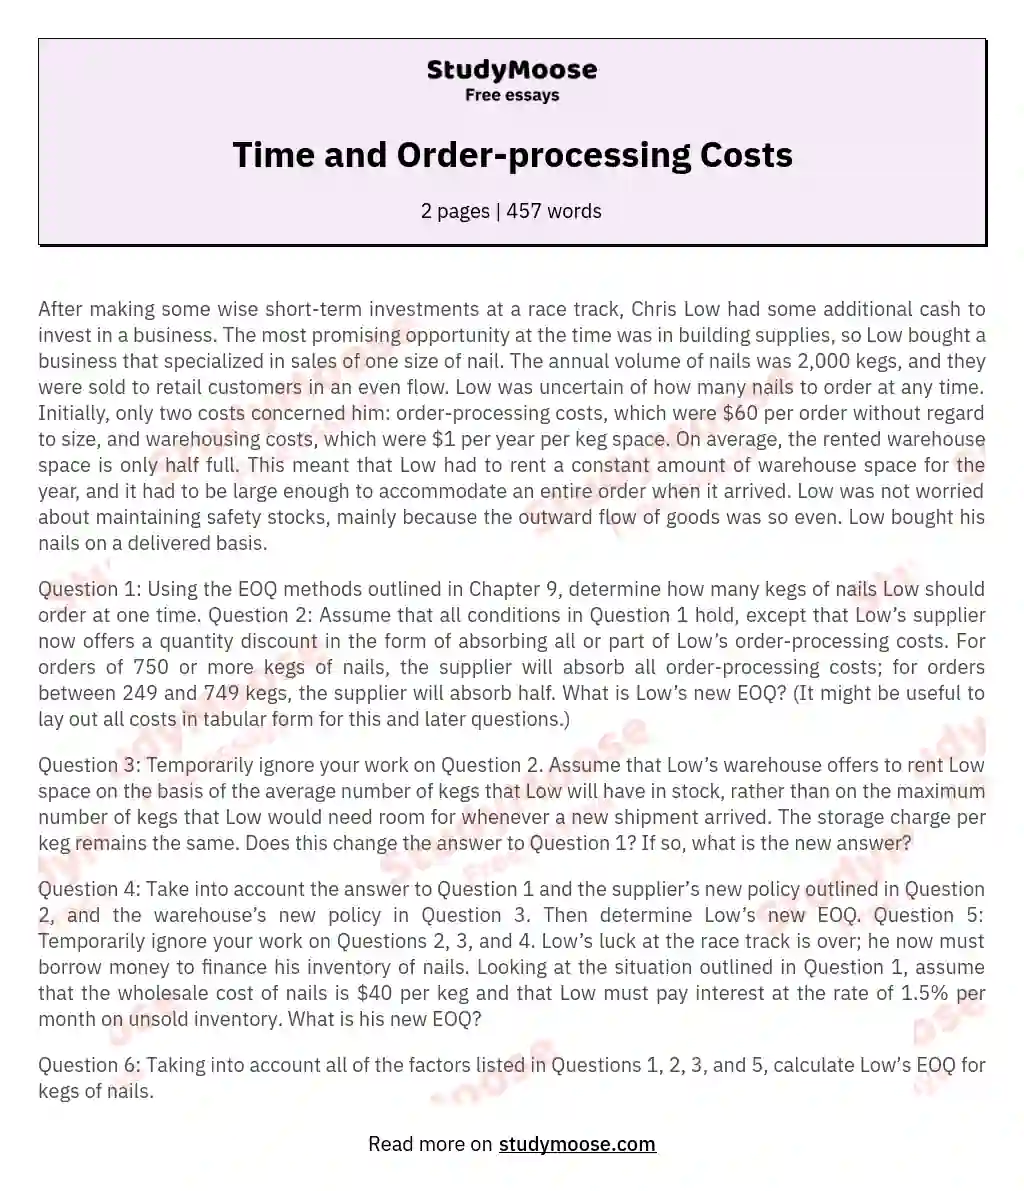 Time and Order-processing Costs essay